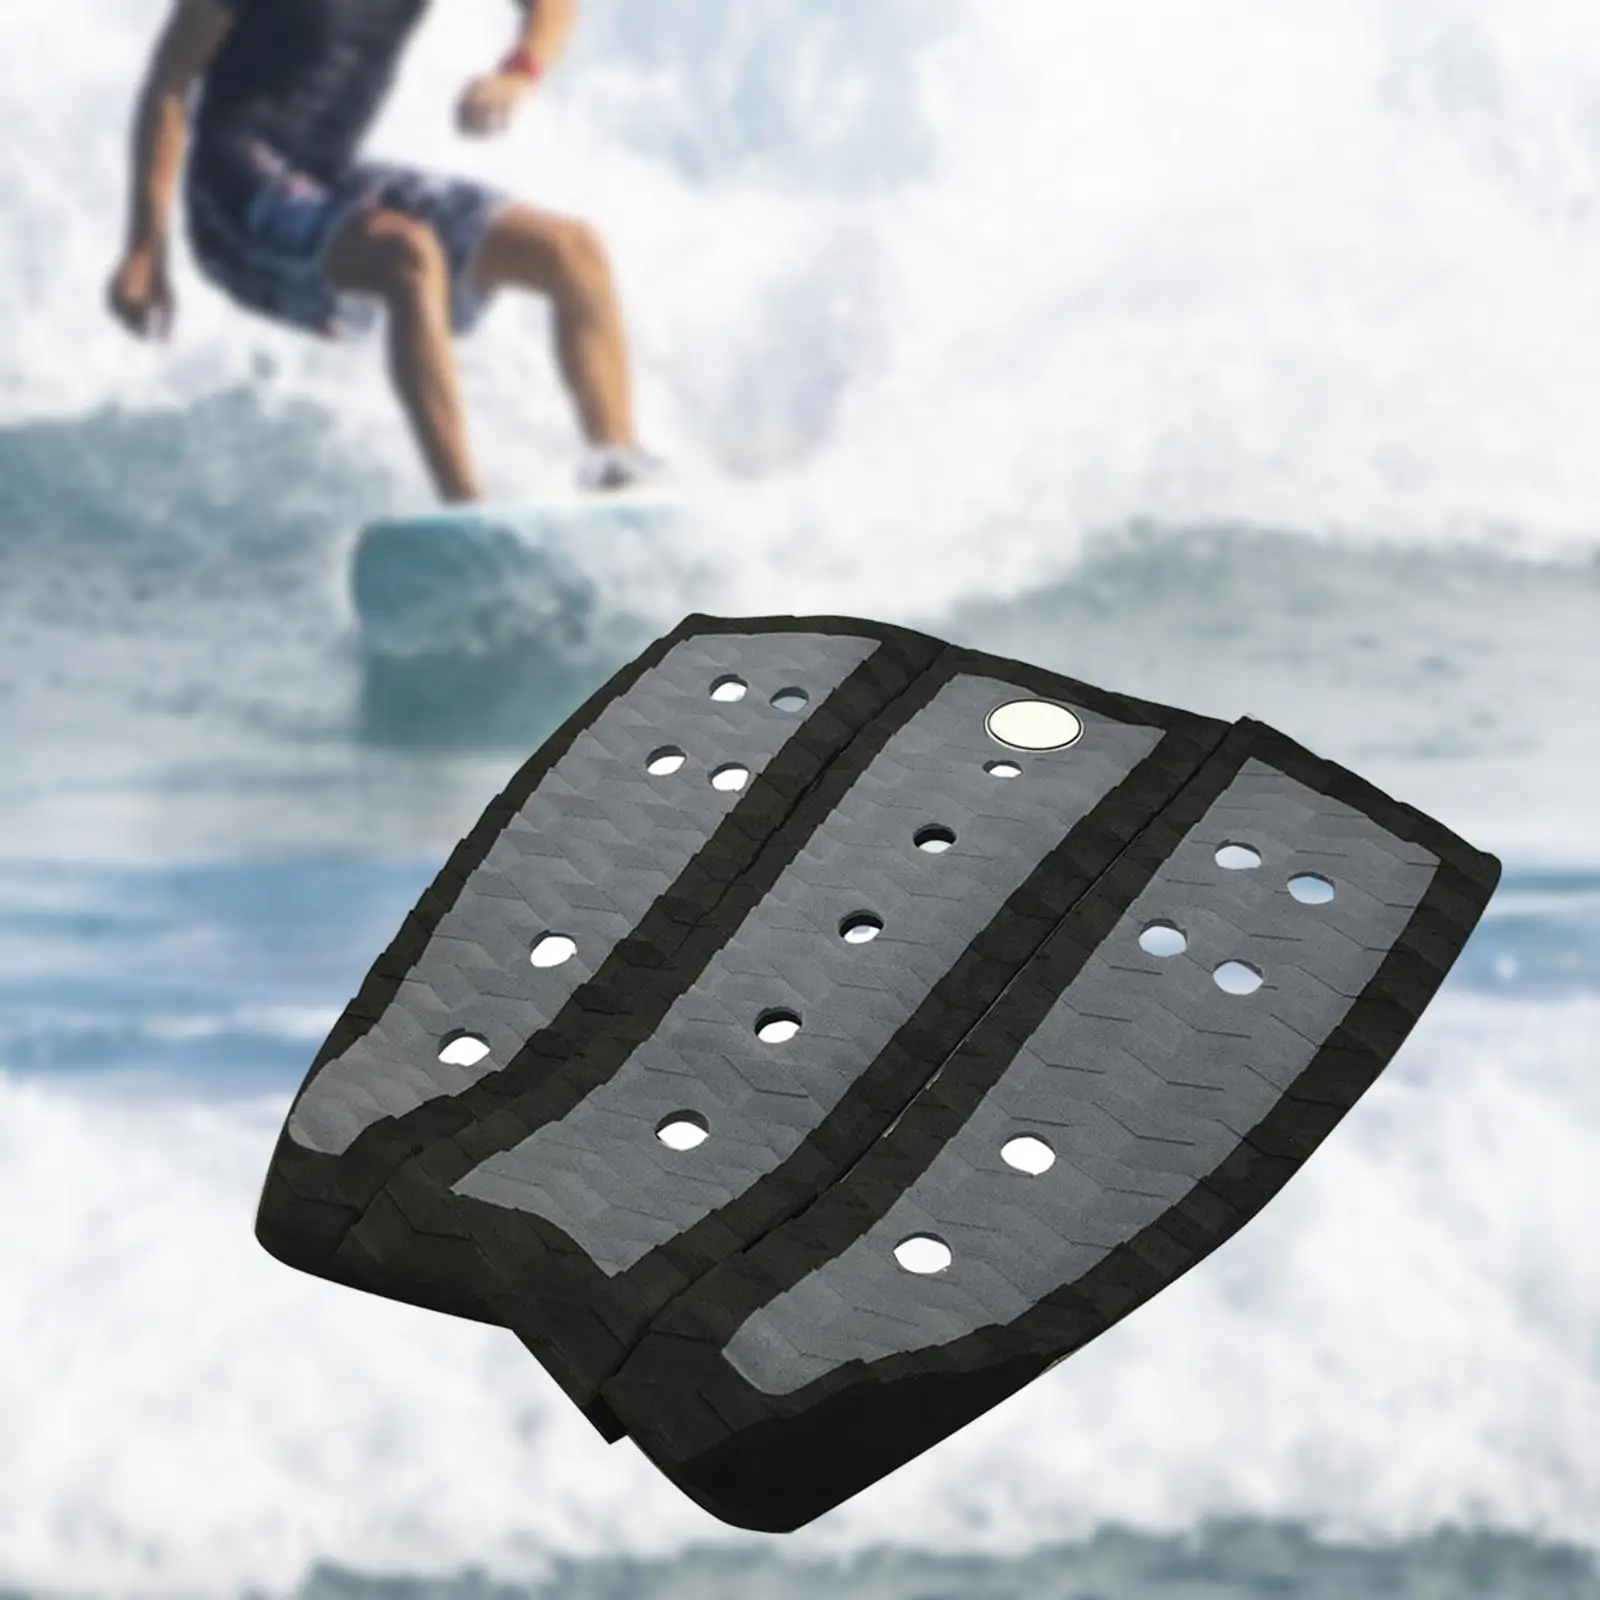 3x EVA Surfboard Traction Pad Surfing Padding Deck Pad Grip Professional Surf Traction Pad for Fish Board Longboard Funboard